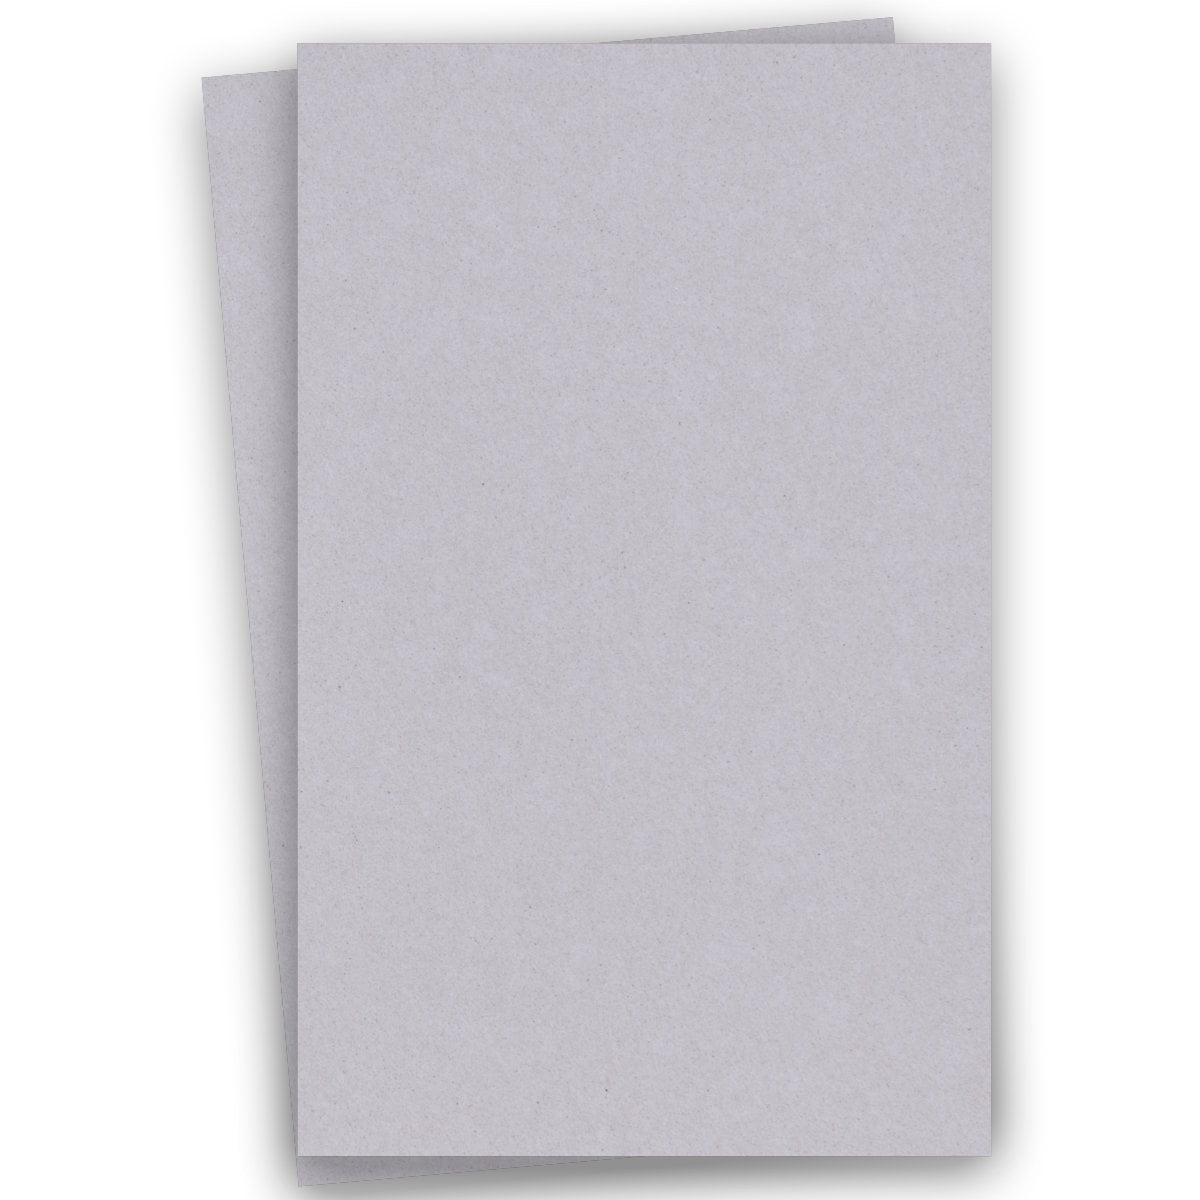 CRUSH 11X17 Ledger Size Earthfriendly CARDSTOCK Paper Recycled Cover Paper 92C Card Stock